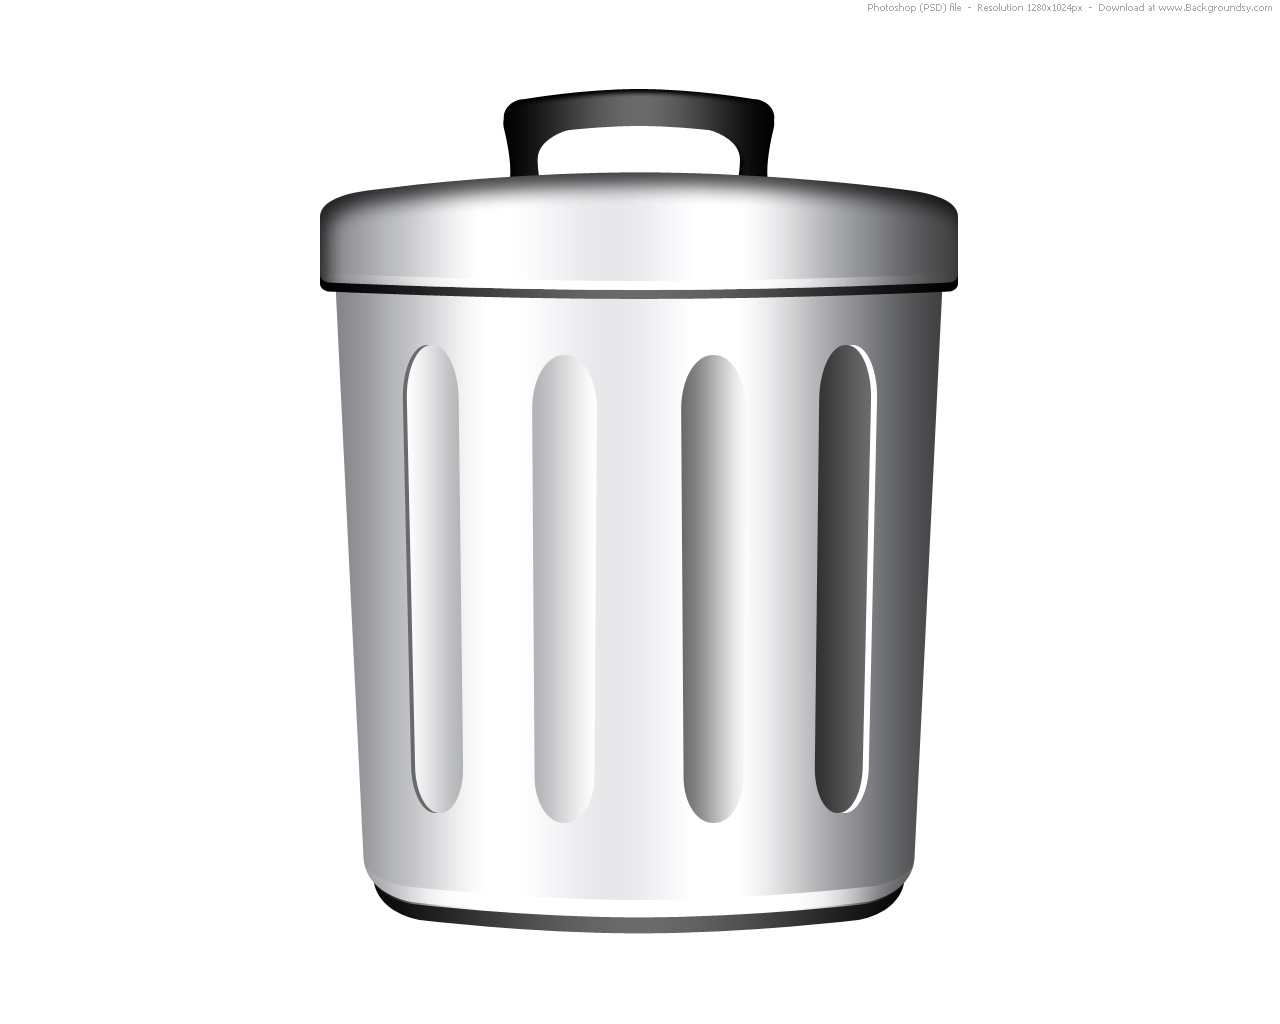 Trash Can And Garbage Bin Icons In Psd Format